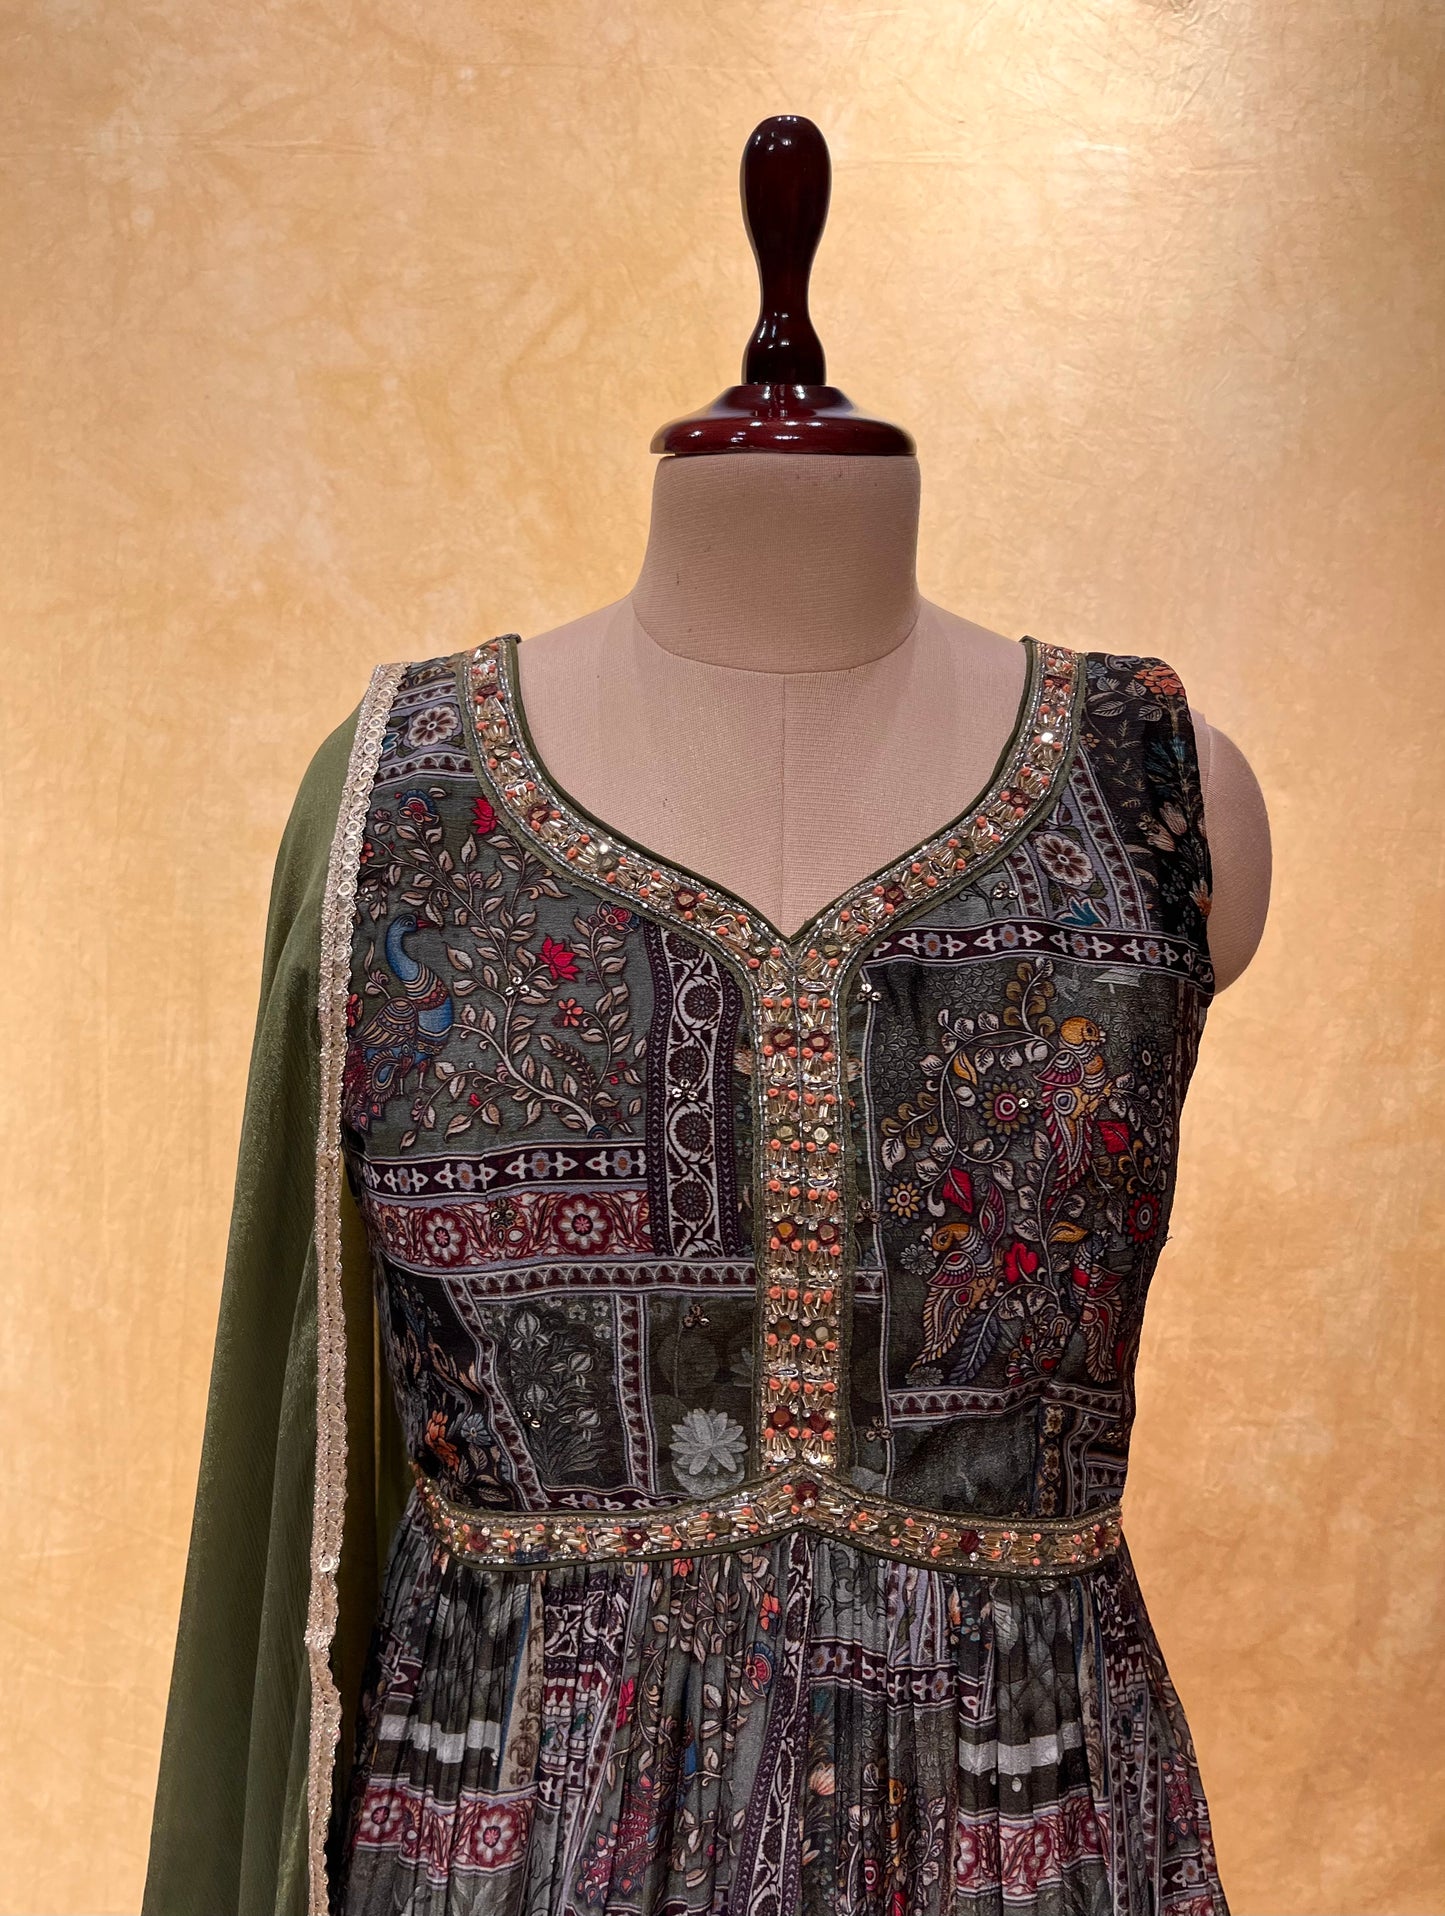 MEHENDI GREEN COLOUR CHINON PRINTED SUIT EMBELLISHED WITH MIRROR & CUTDANA WORK ( ANARKALI SUIT GREEN COLOUR )